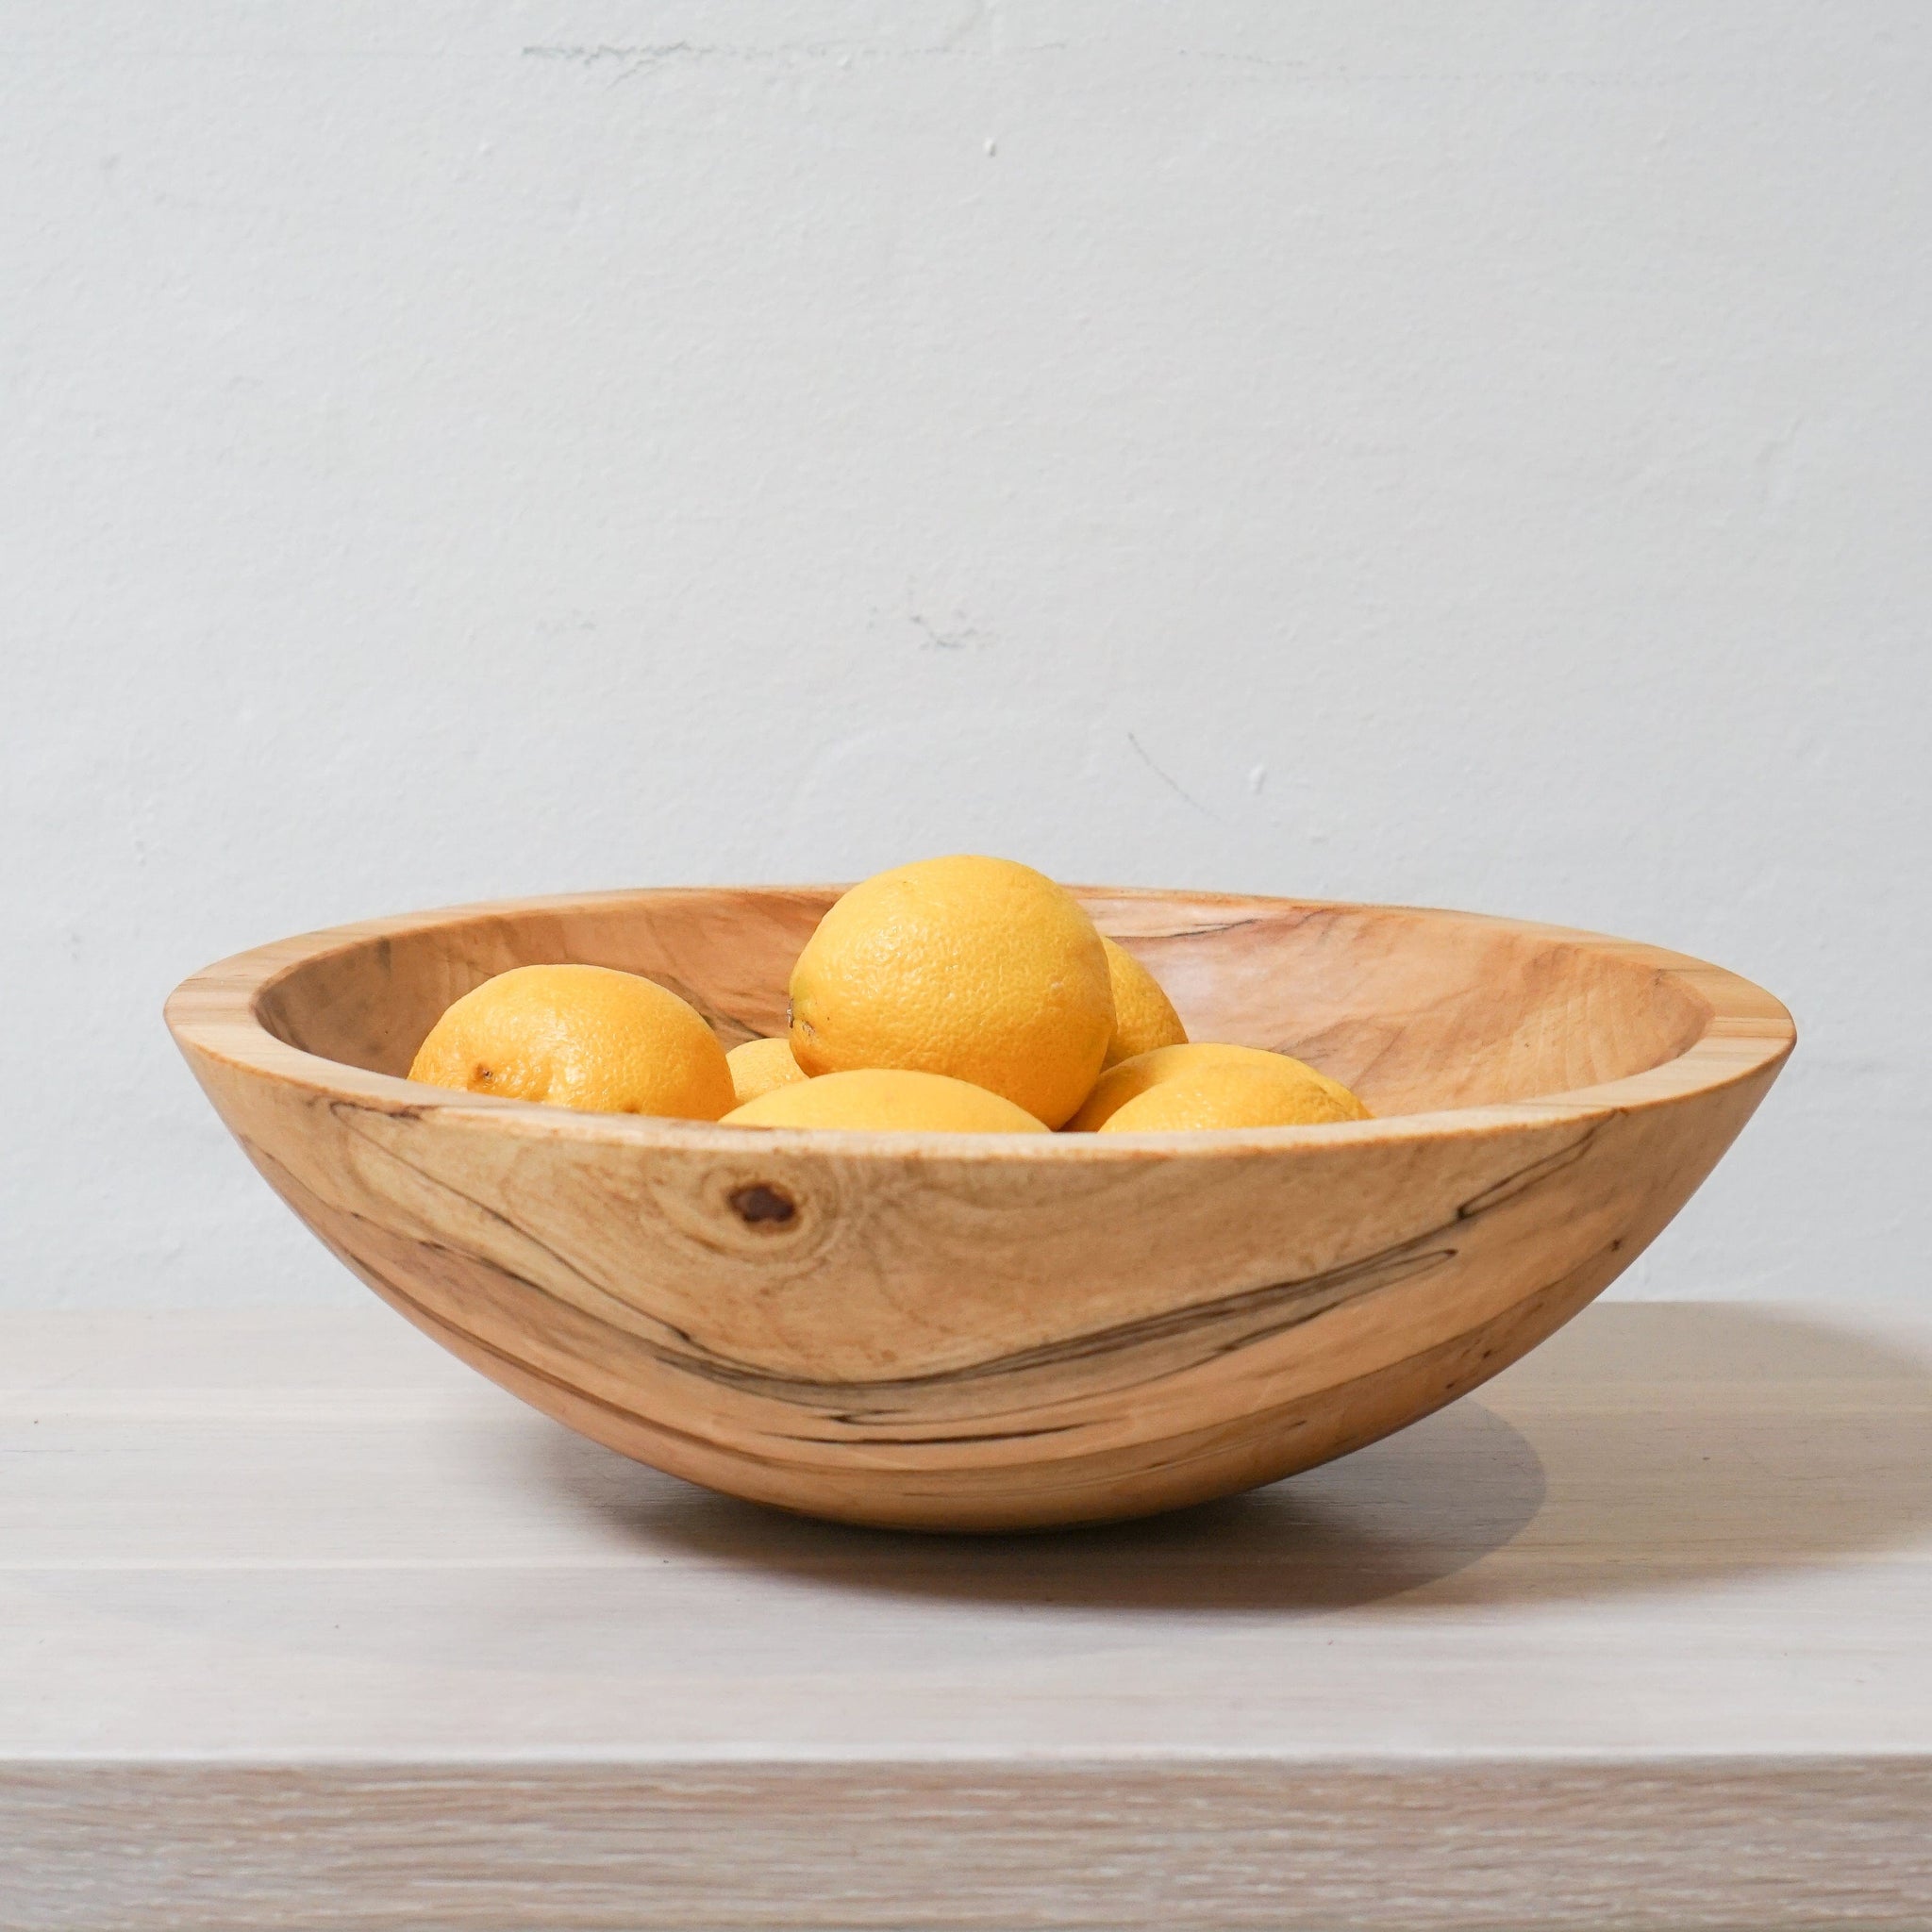 Spencer Peterman Bowls Spalted Maple Round Salad Bowl - 13"